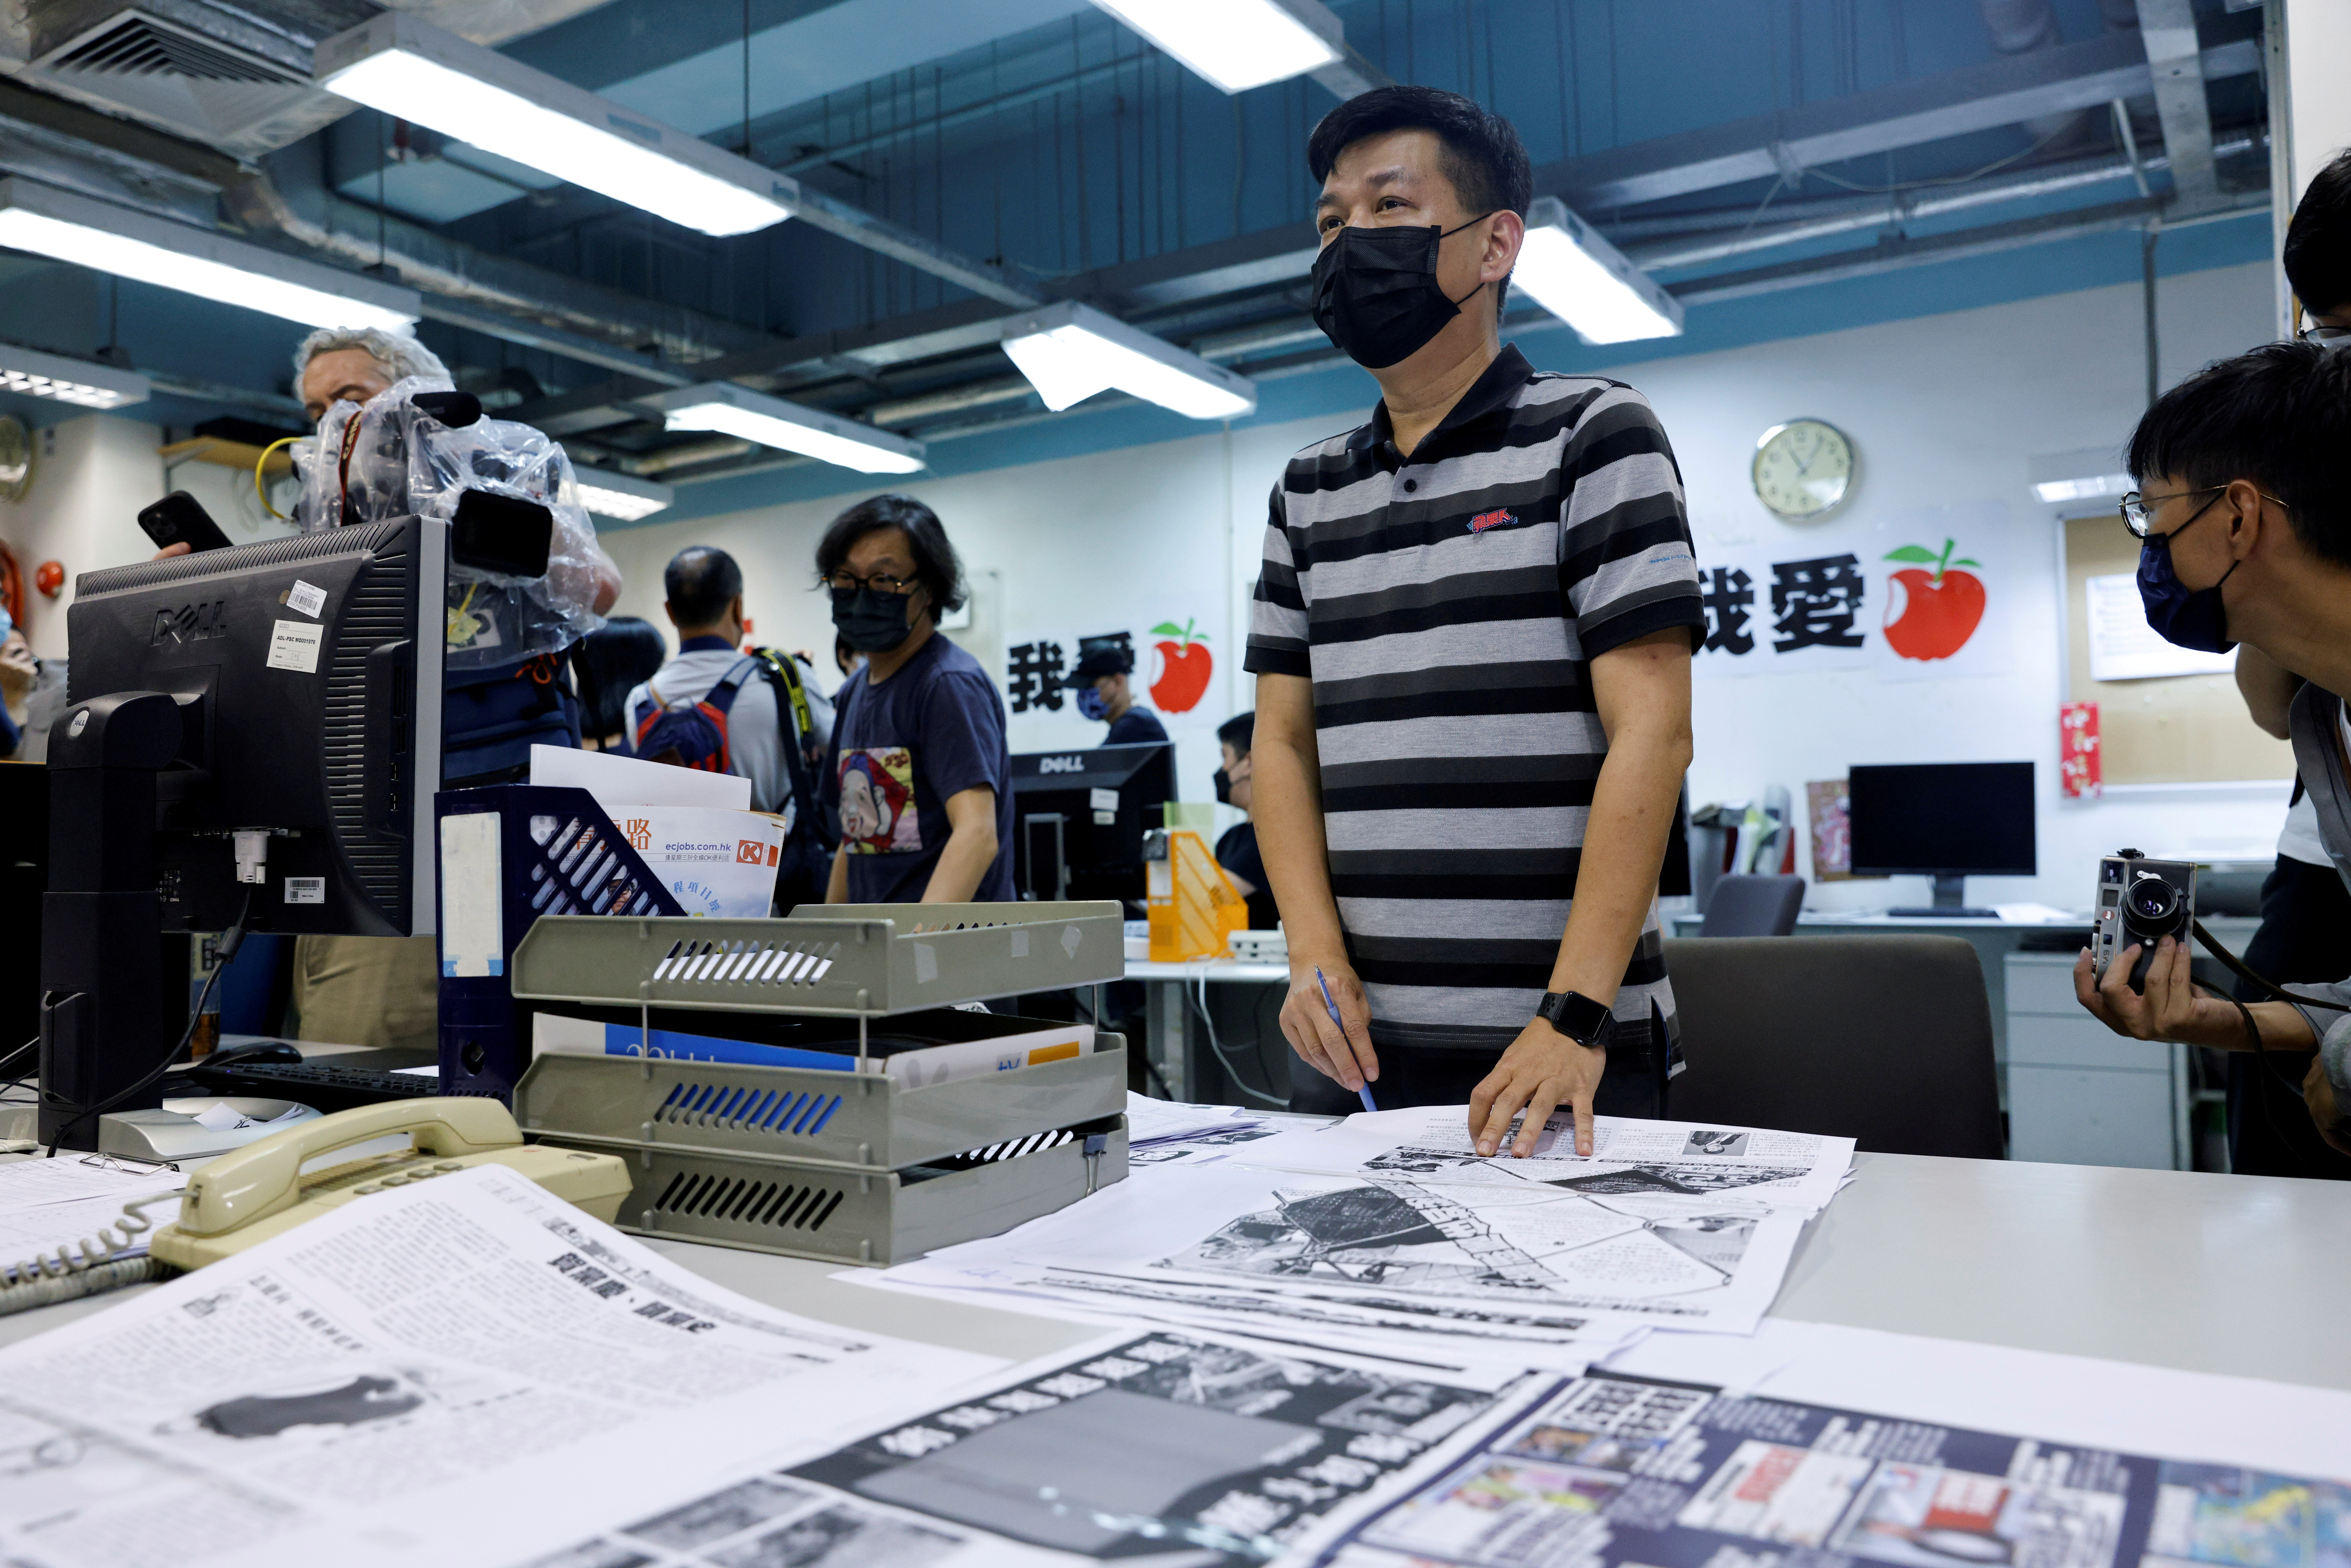 Lam Man-chung, Executive Editor-in-Chief of Apple Daily works on the final edition of the newspaper in Hong Kong, China June 23, 2021. REUTERS/Tyrone Siu